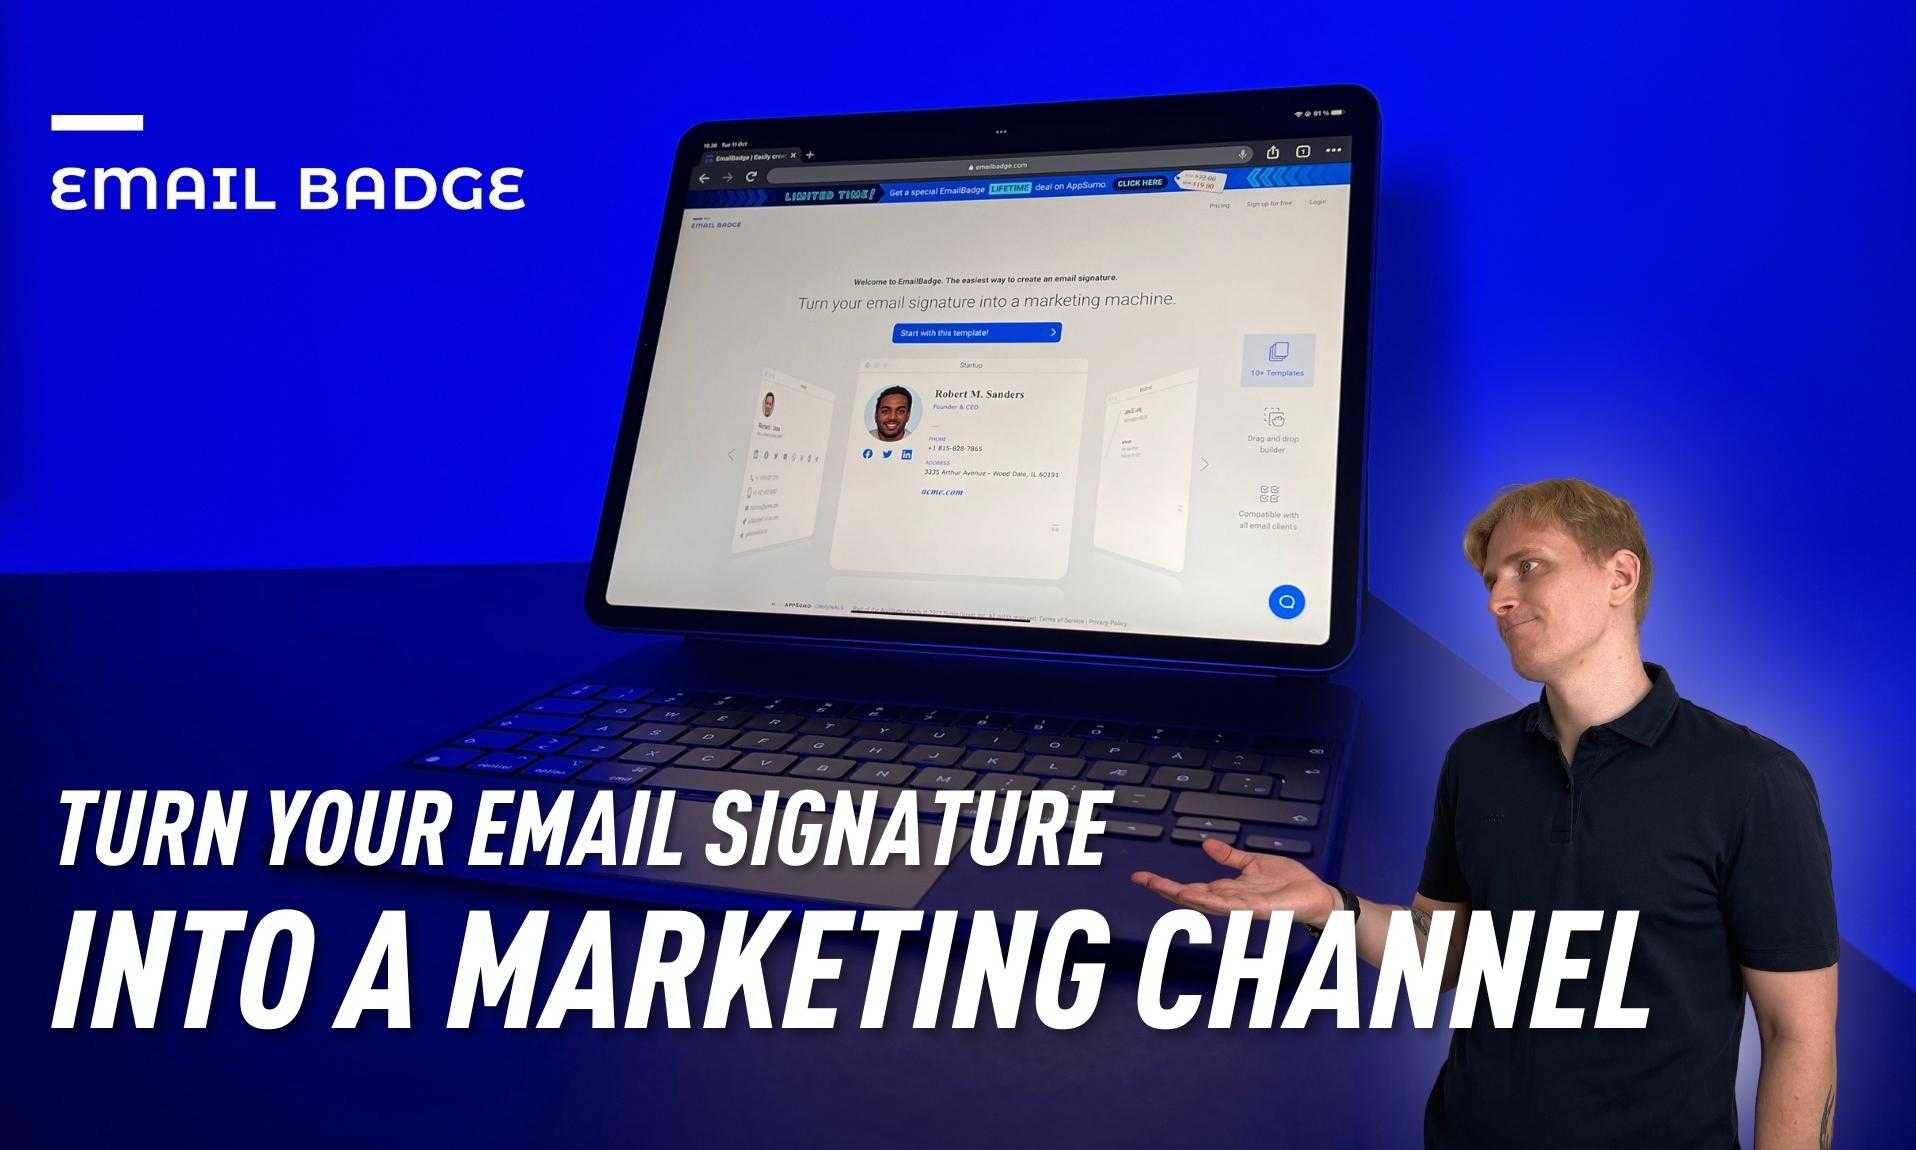 EmailBadge Review - Turn Your Email Signature Into Marketing